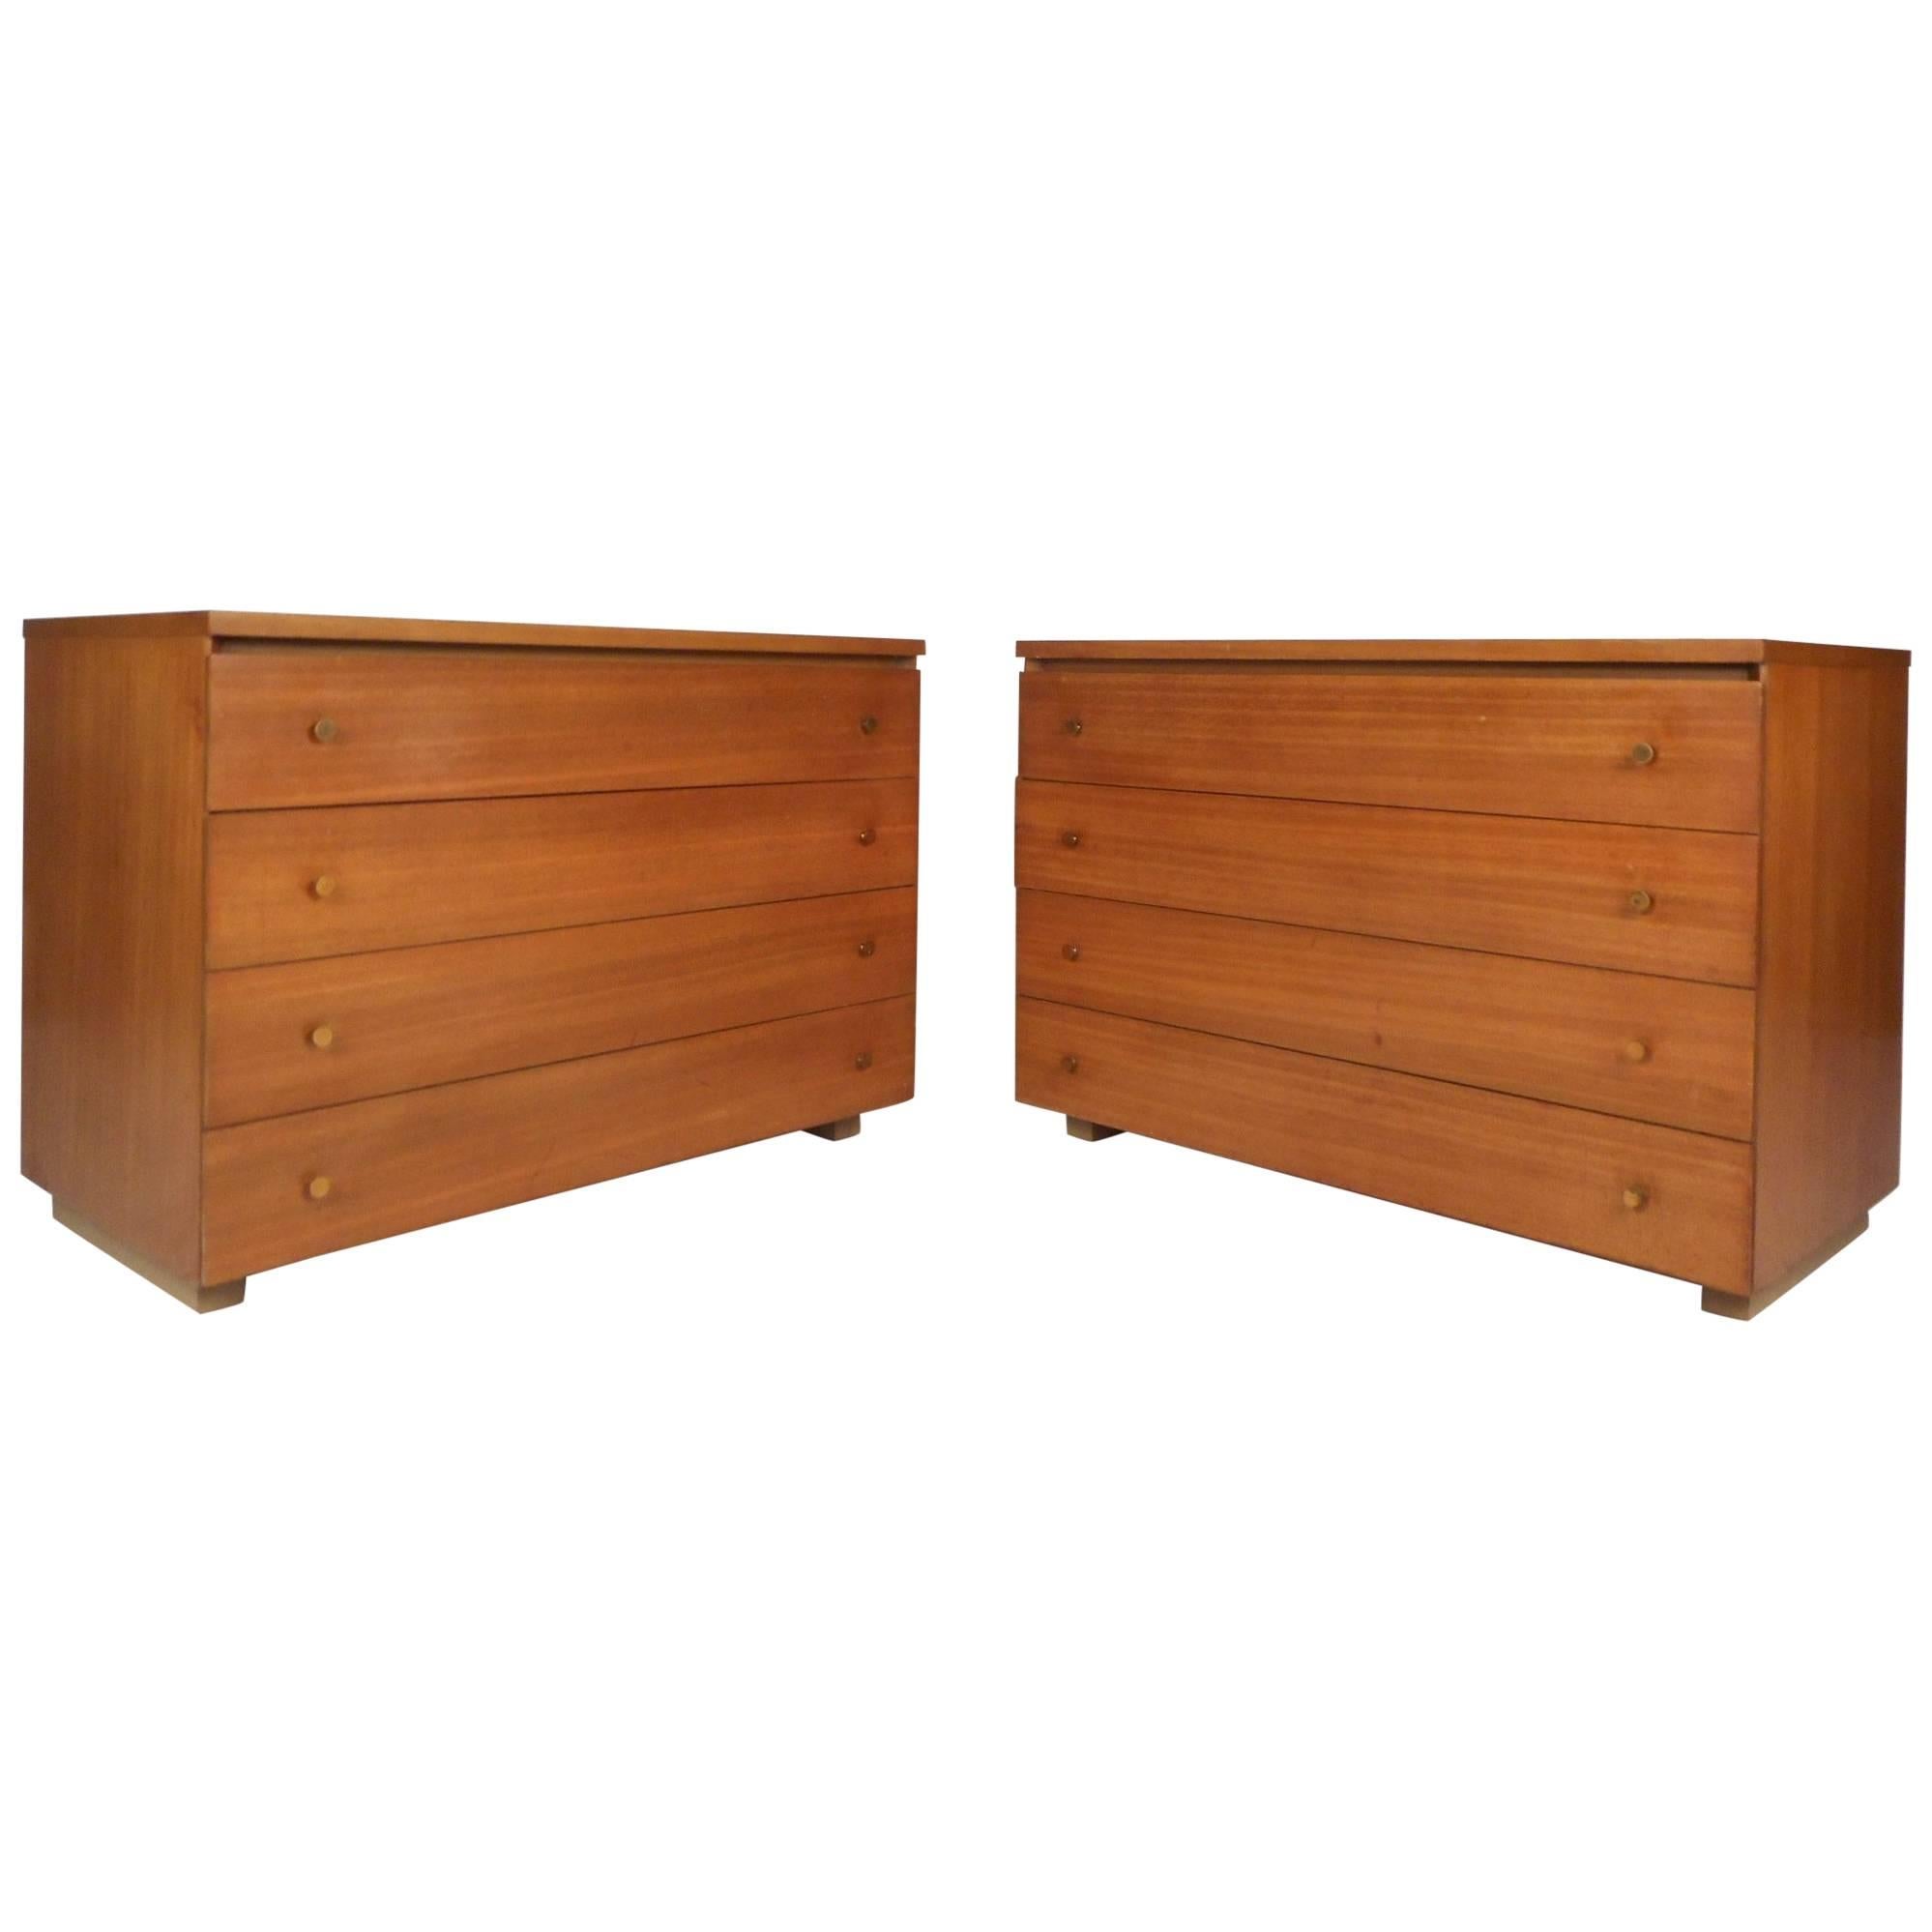 Pair of Mid-Century Modern Chests by Paul McCobb for Calvin